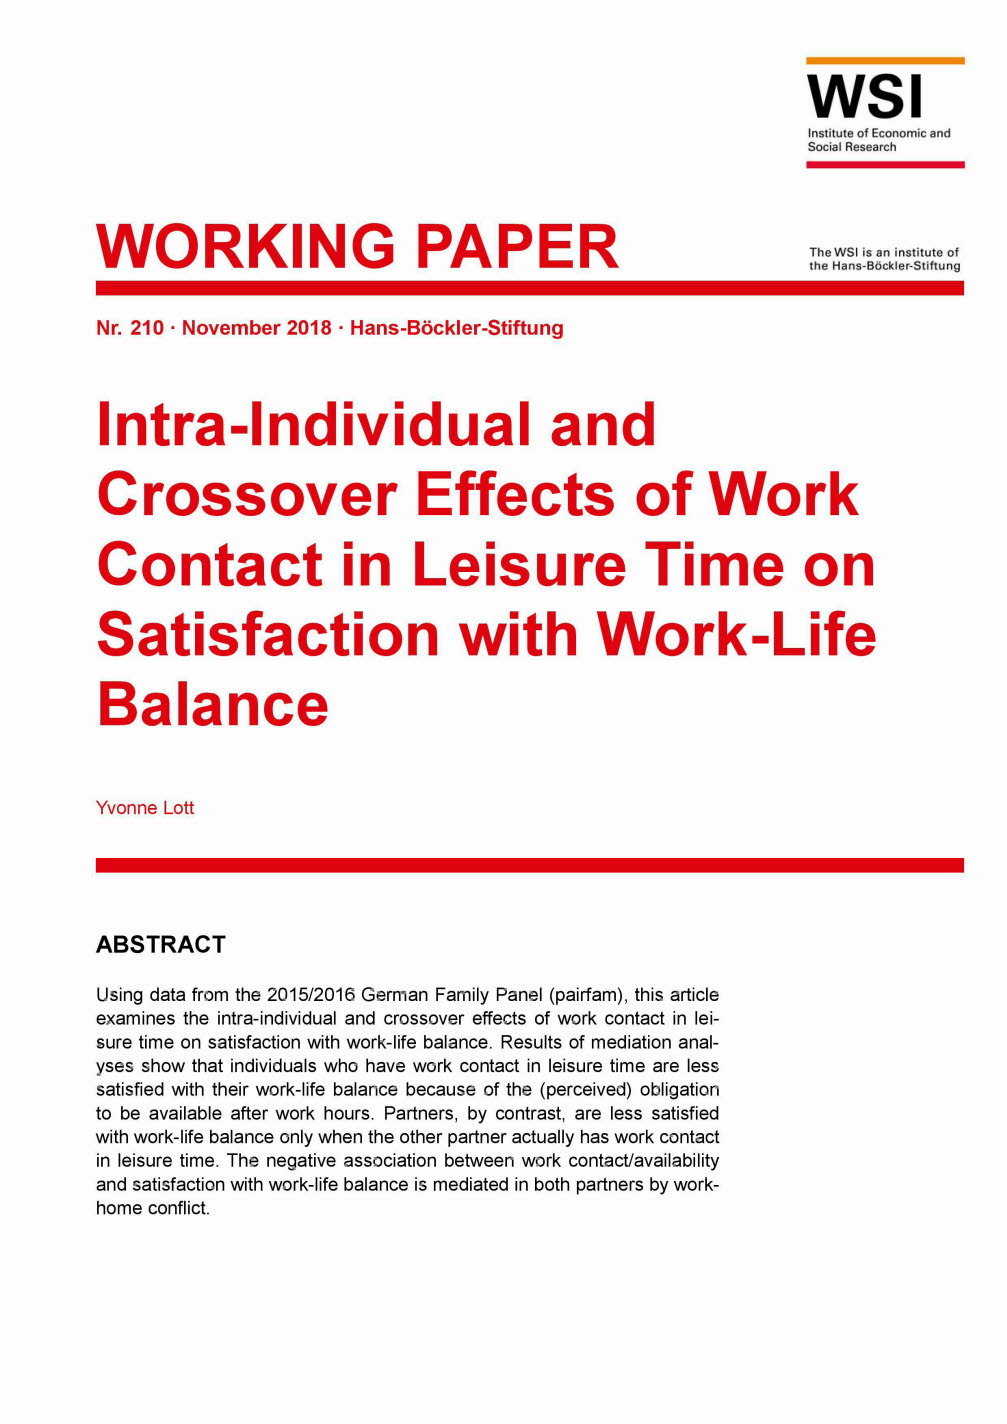 Intra-individual and crossover effects of work contact in leisure time on satisfaction with work-life balance